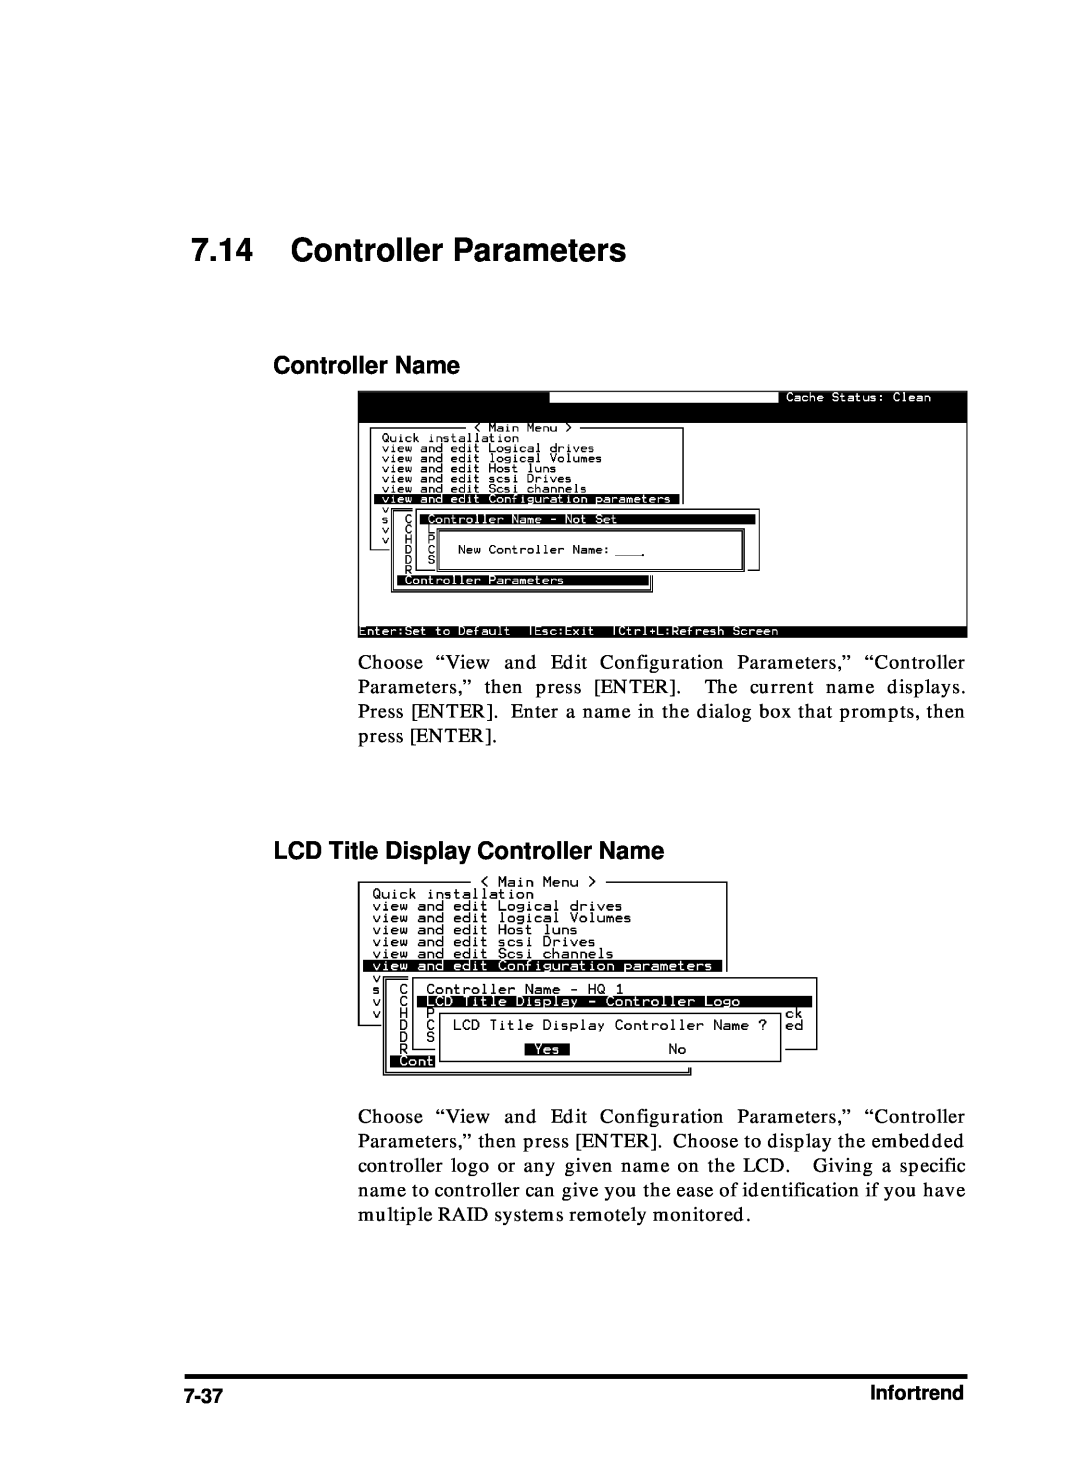 Compaq Infortrend manual Controller Parameters, LCD Title Display Controller Name 